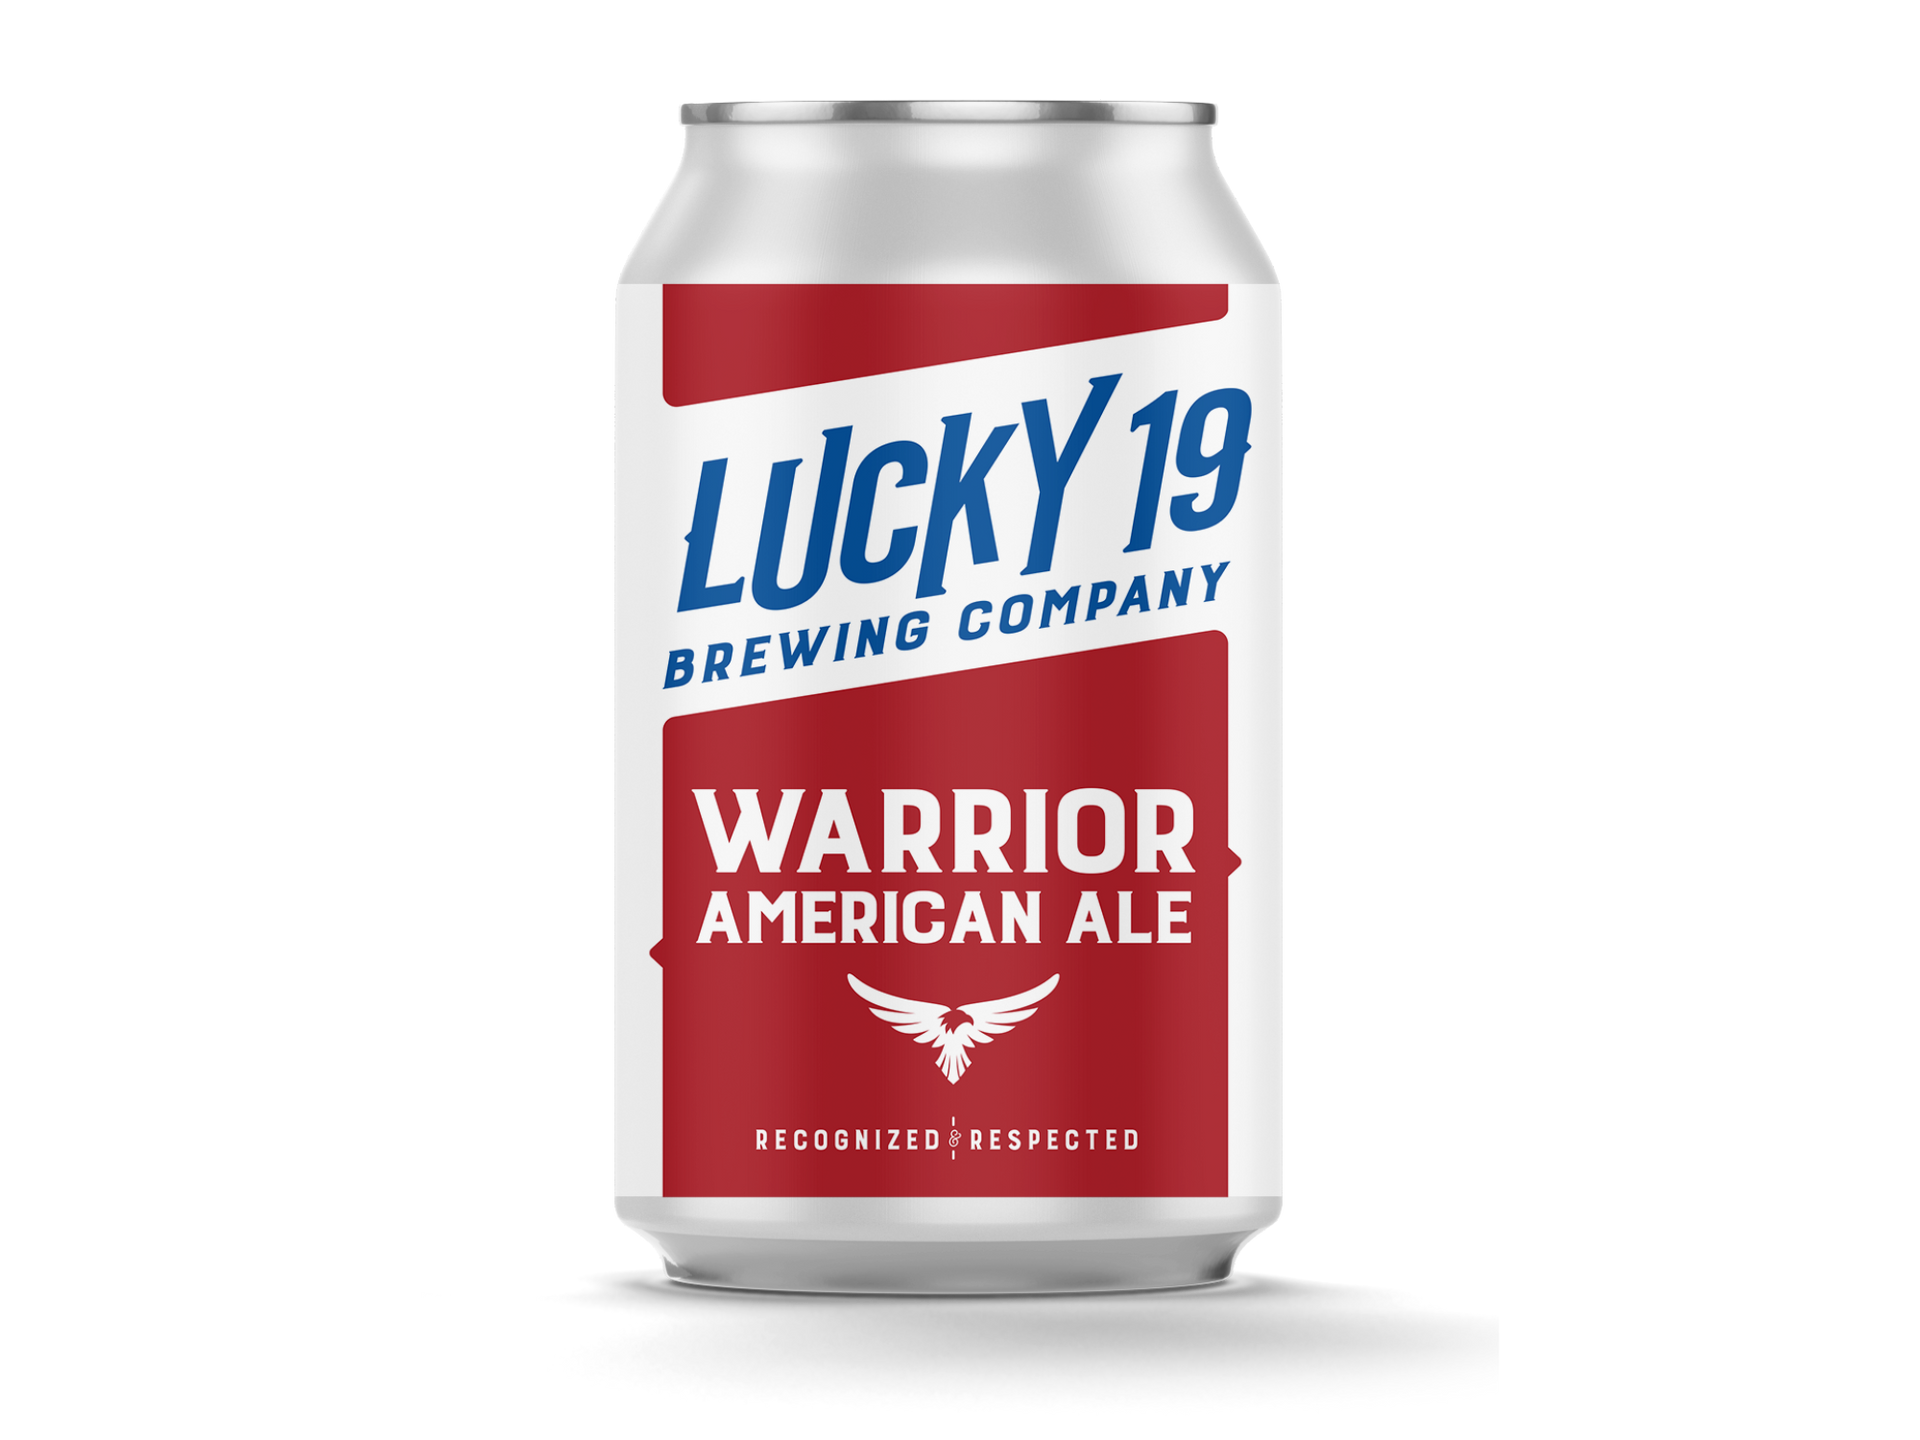 Warrior American Ale can